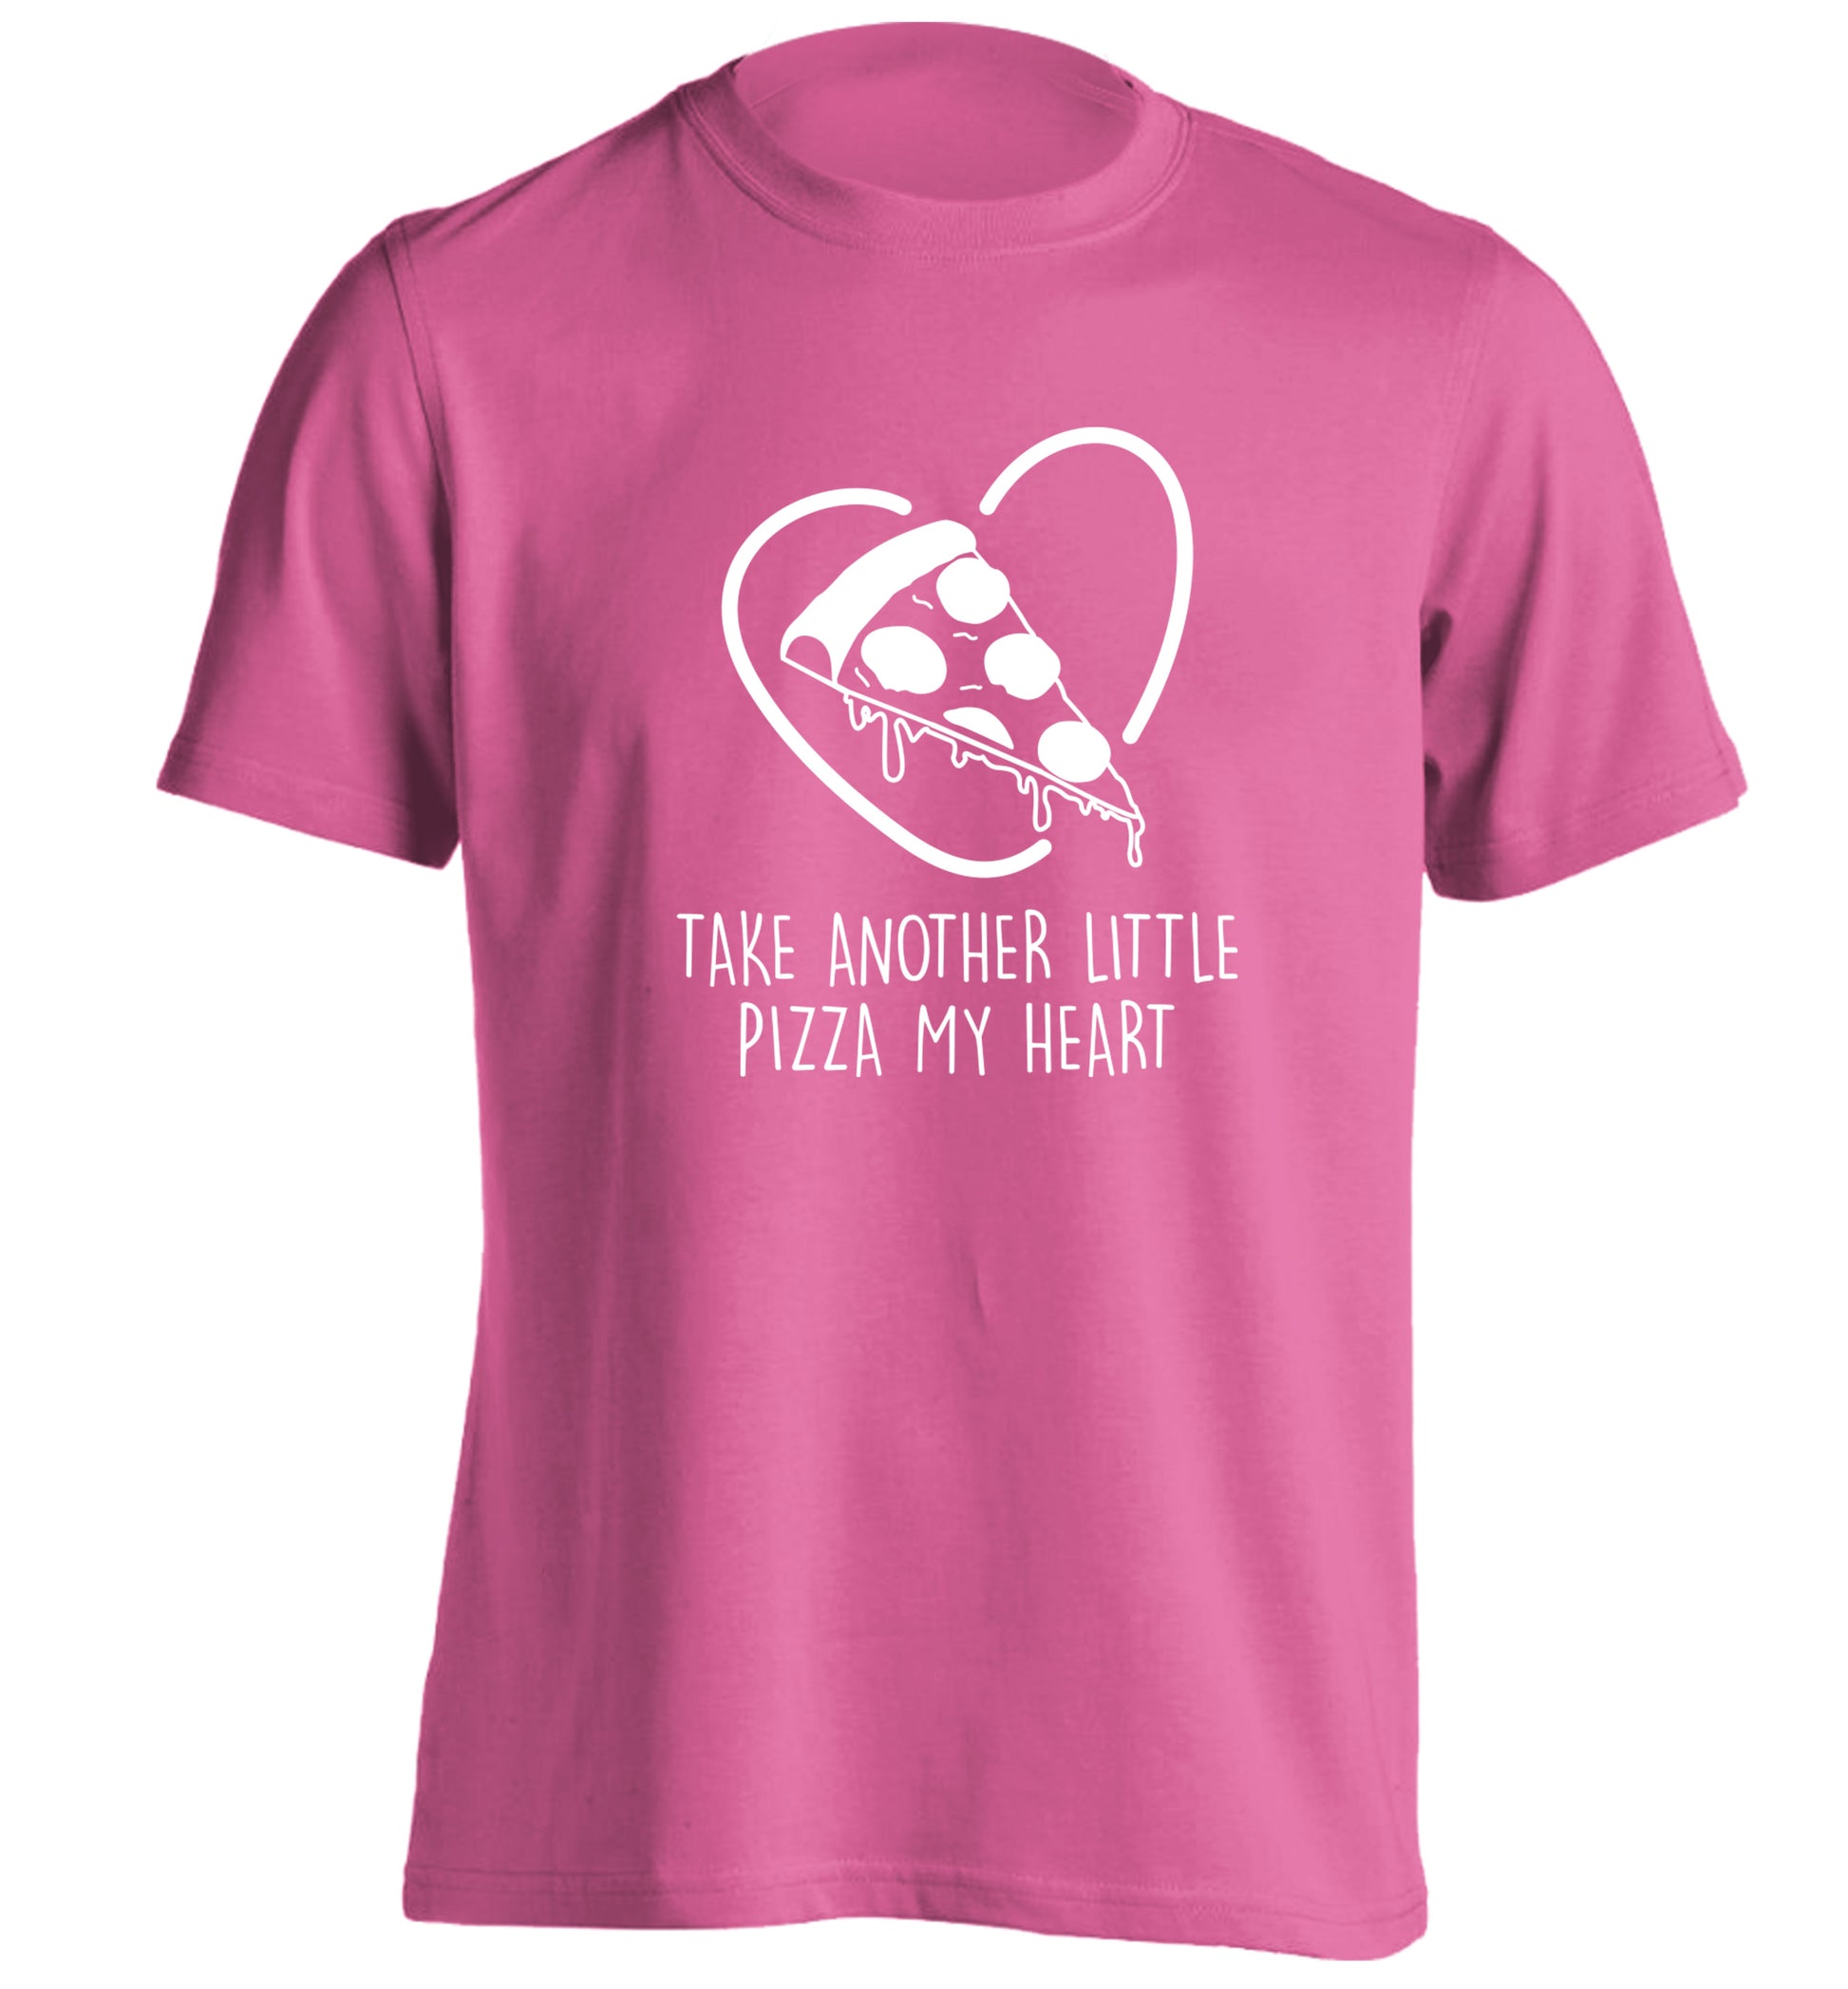 Take another little pizza my heart adults unisex pink Tshirt 2XL